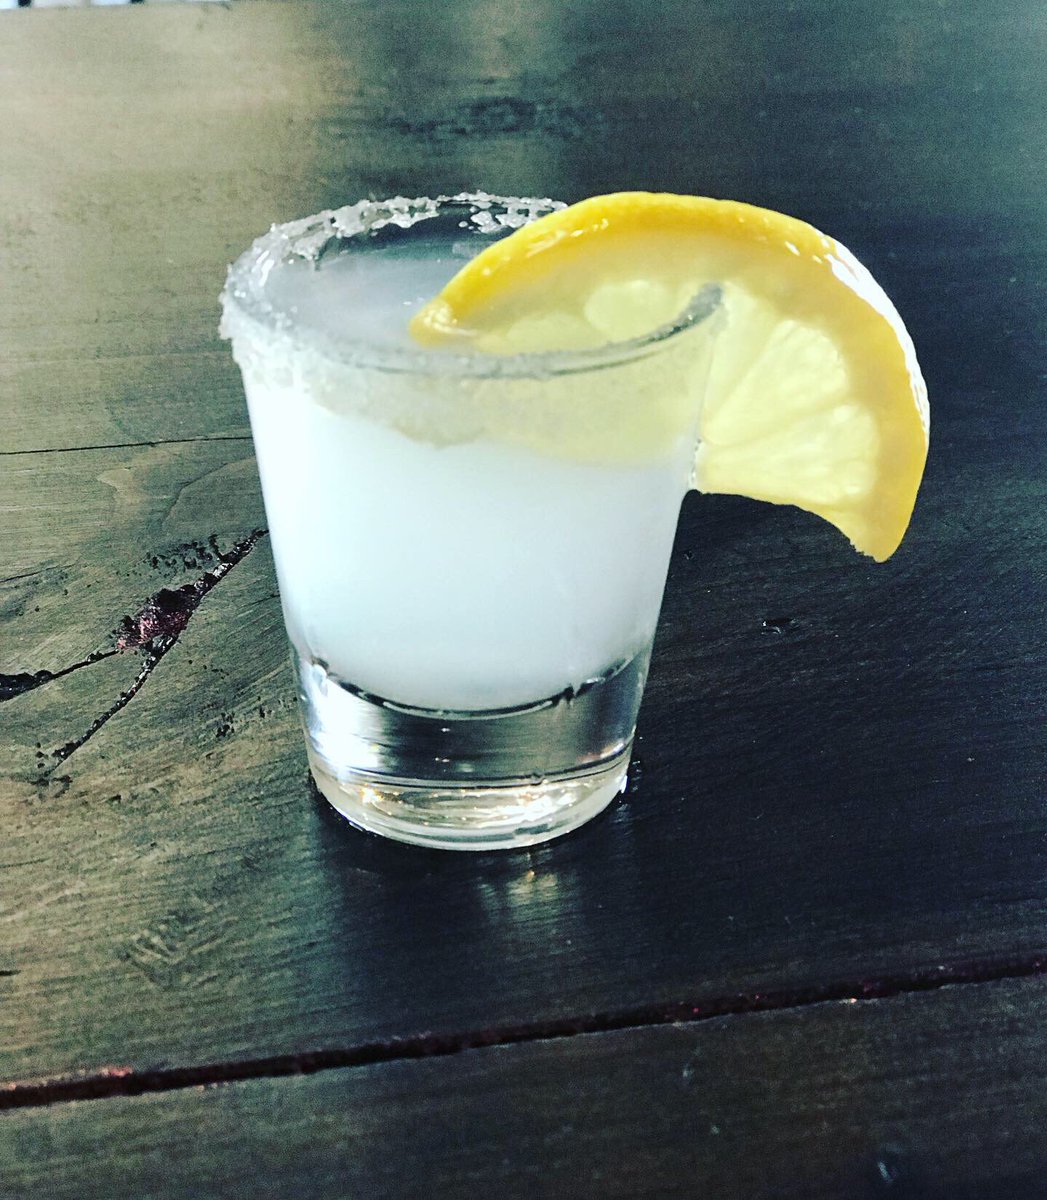 Dam Red Barn On Twitter Tonight We Have 3 Lemon Drop Shots From 6 10 Shades Of Blue Live On Stage Starting At 8 30pm Our Food Truck Is Seaux Cajun Cooking Up,1922 Silver Dollar Value Chart